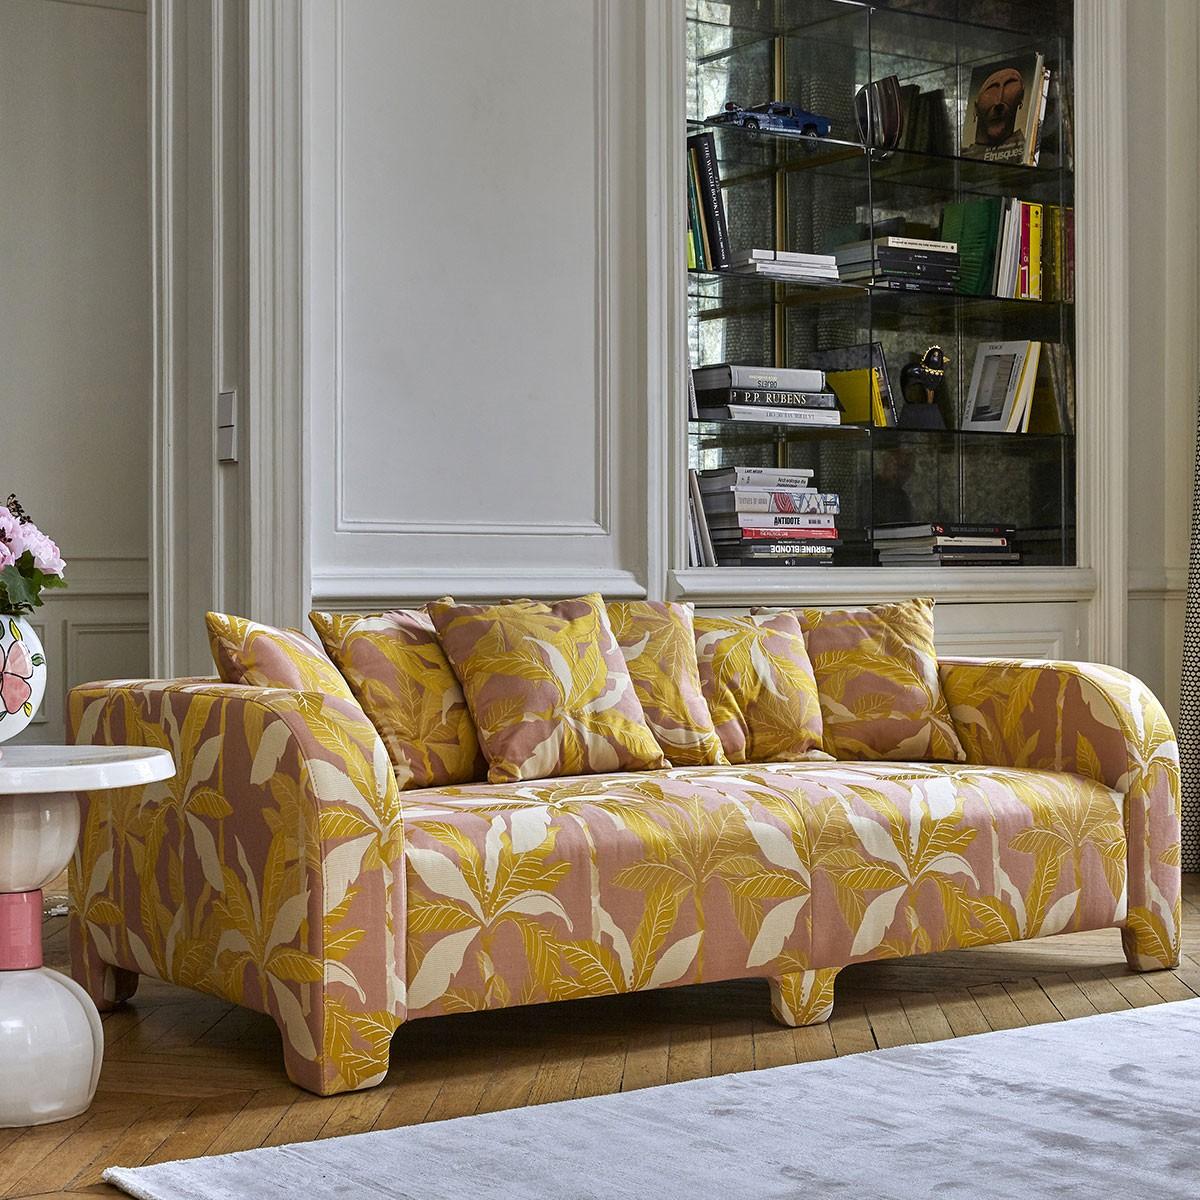 Popus Editions Graziella 2 Seater Sofa in Corn Megeve Fabric Knit Effect

A foot that hides another. A cushion that hides another. A curve that hides another with contemporary lines and a base like a punctuation mark, this sofa gives pride of